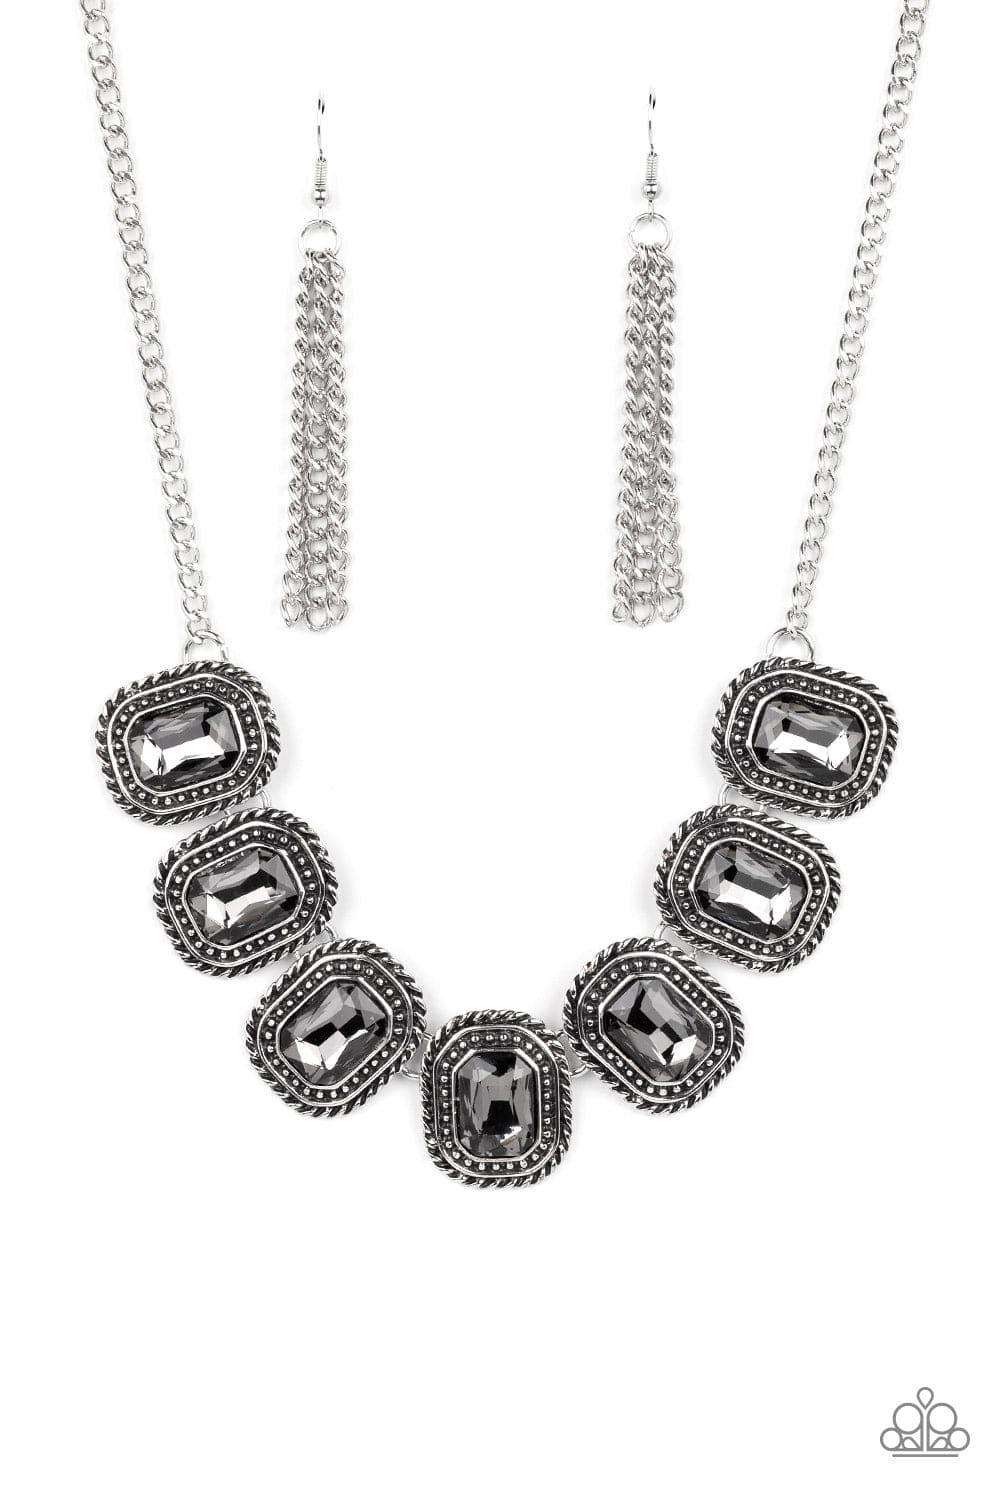 Paparazzi Accessories - Iced Iron - Silver Necklace - Bling by JessieK